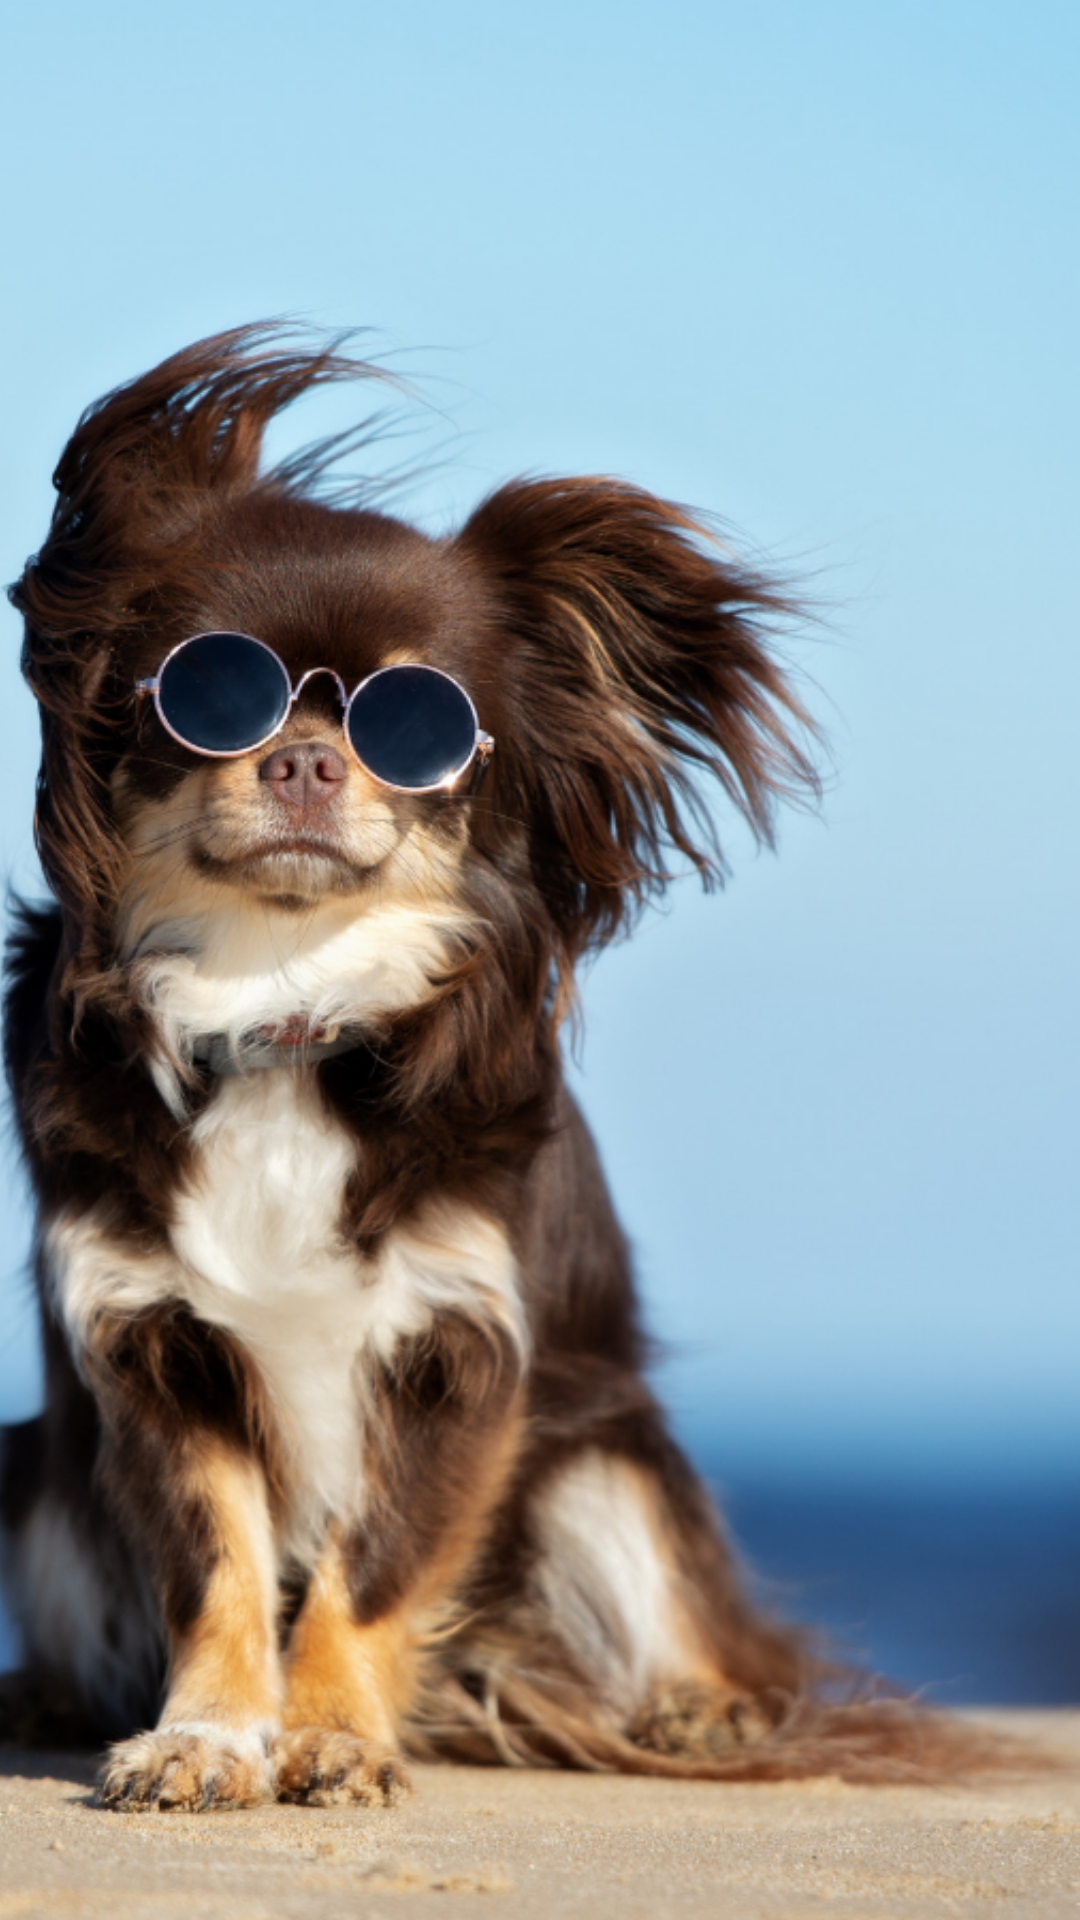 Sun safety tips for dogs